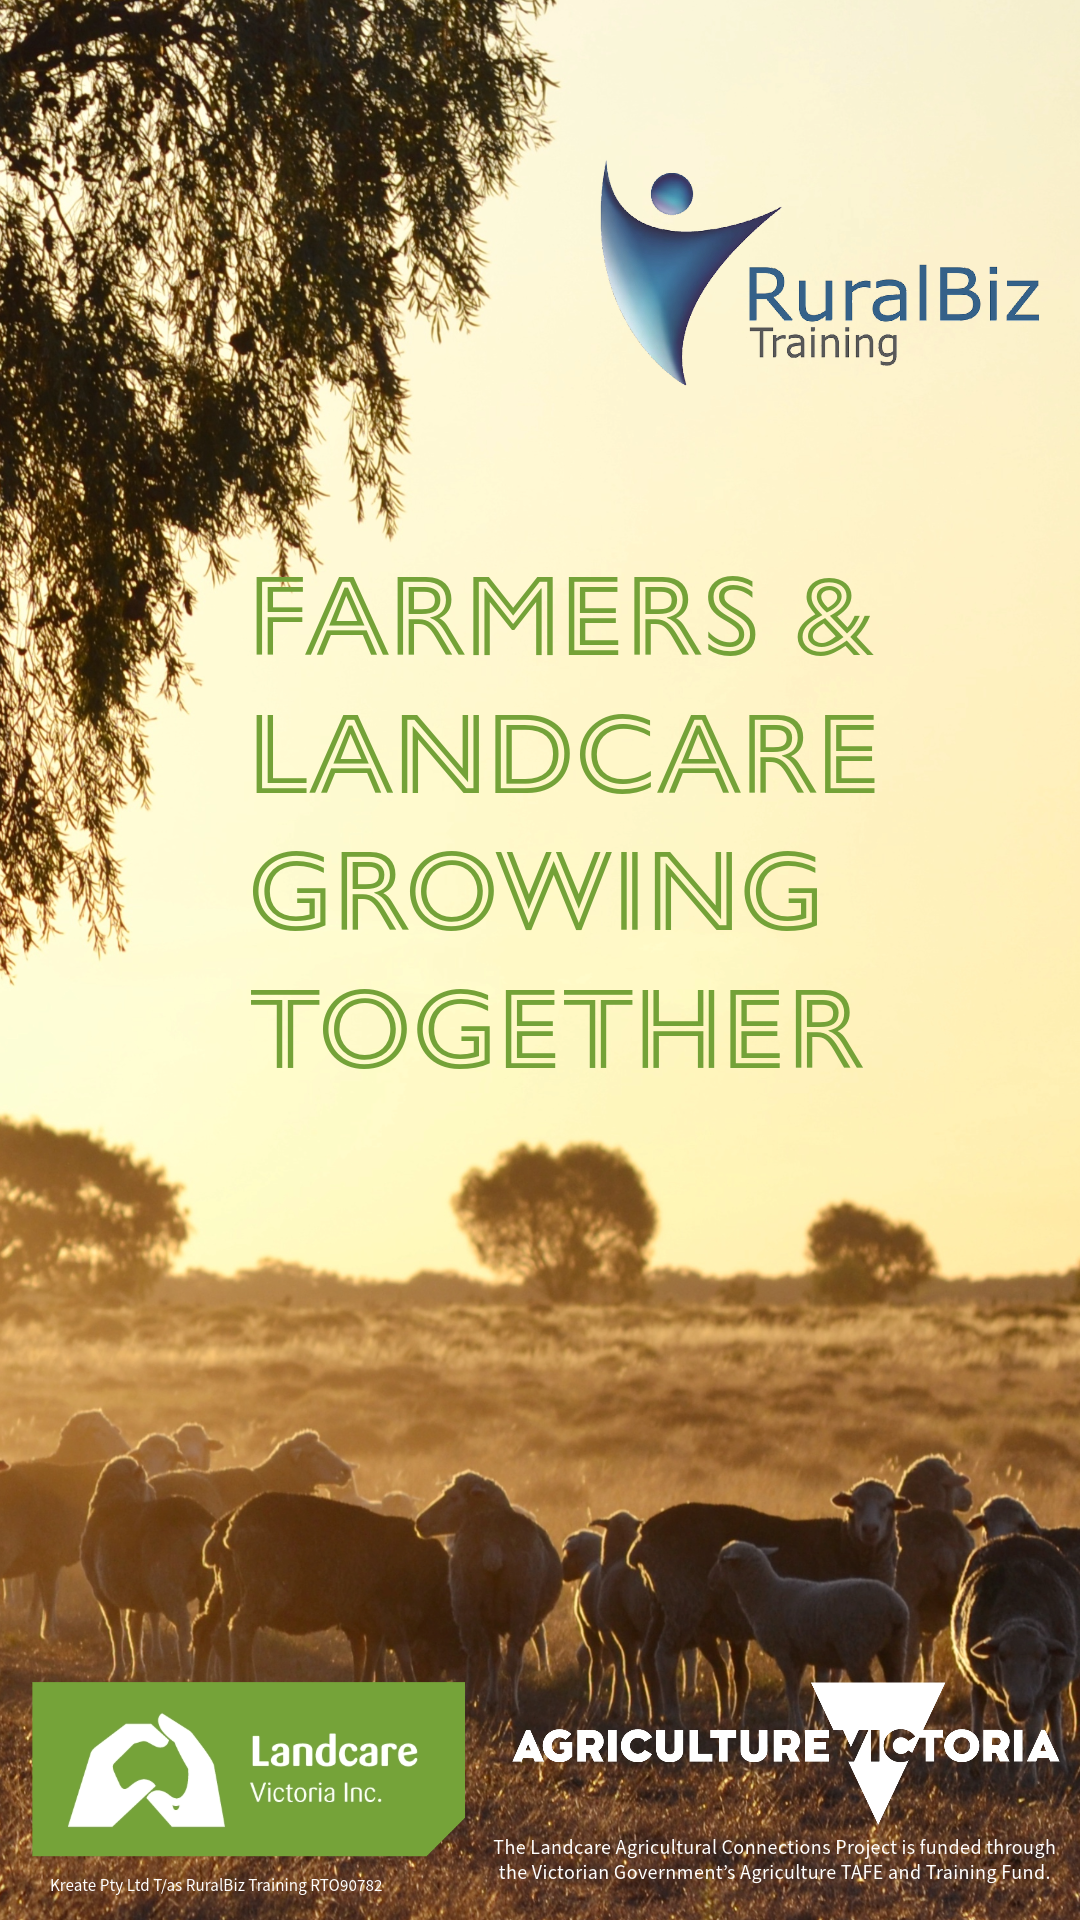 Farmers and Landcare - Growing Together! 